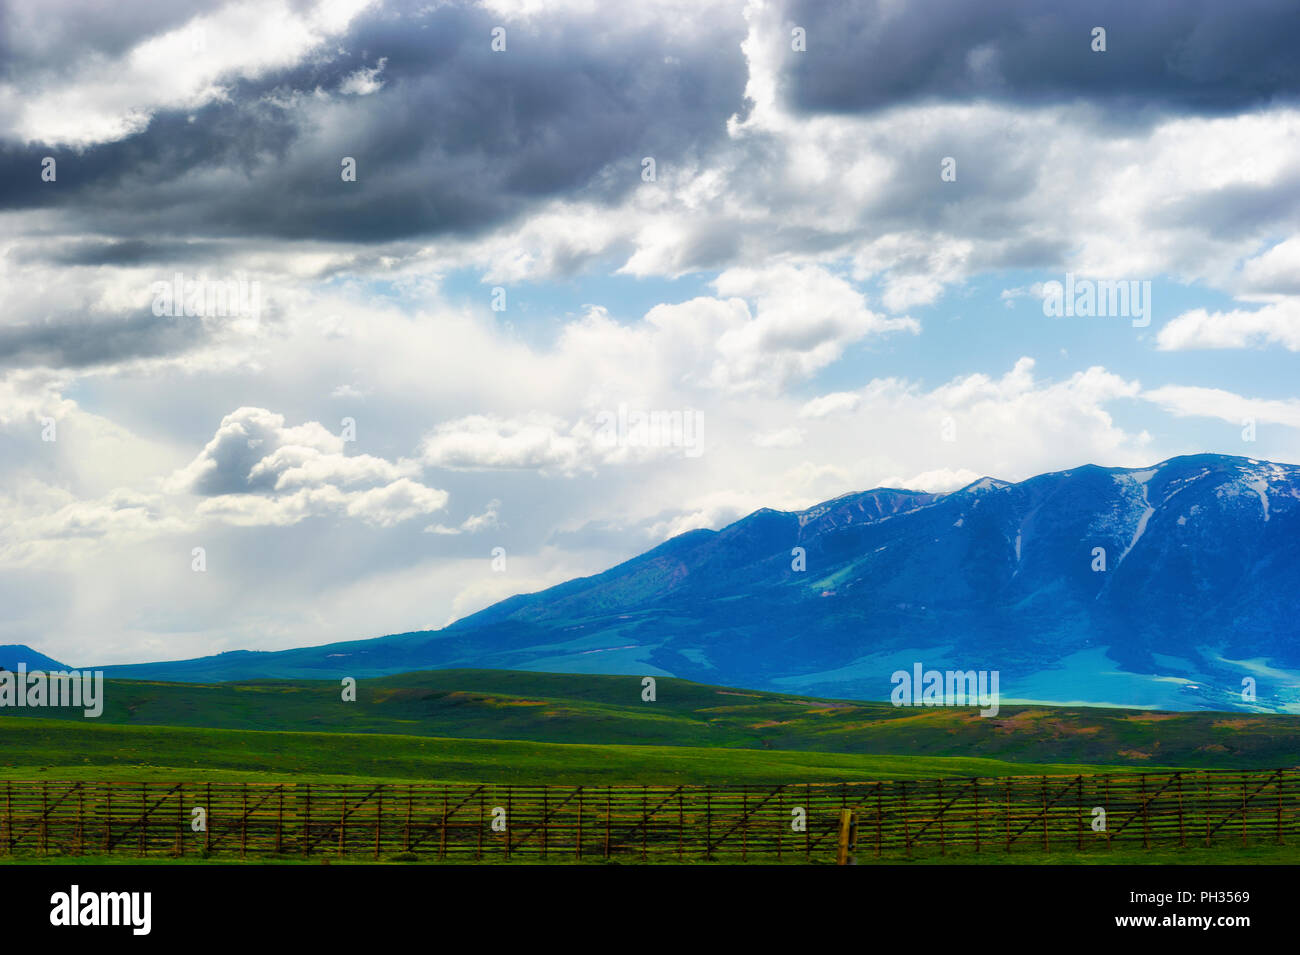 Views of Wyoming's ominous cloudy skies over open fields and sections of the Laramie Mountain Range, seen from highway 80 Stock Photo